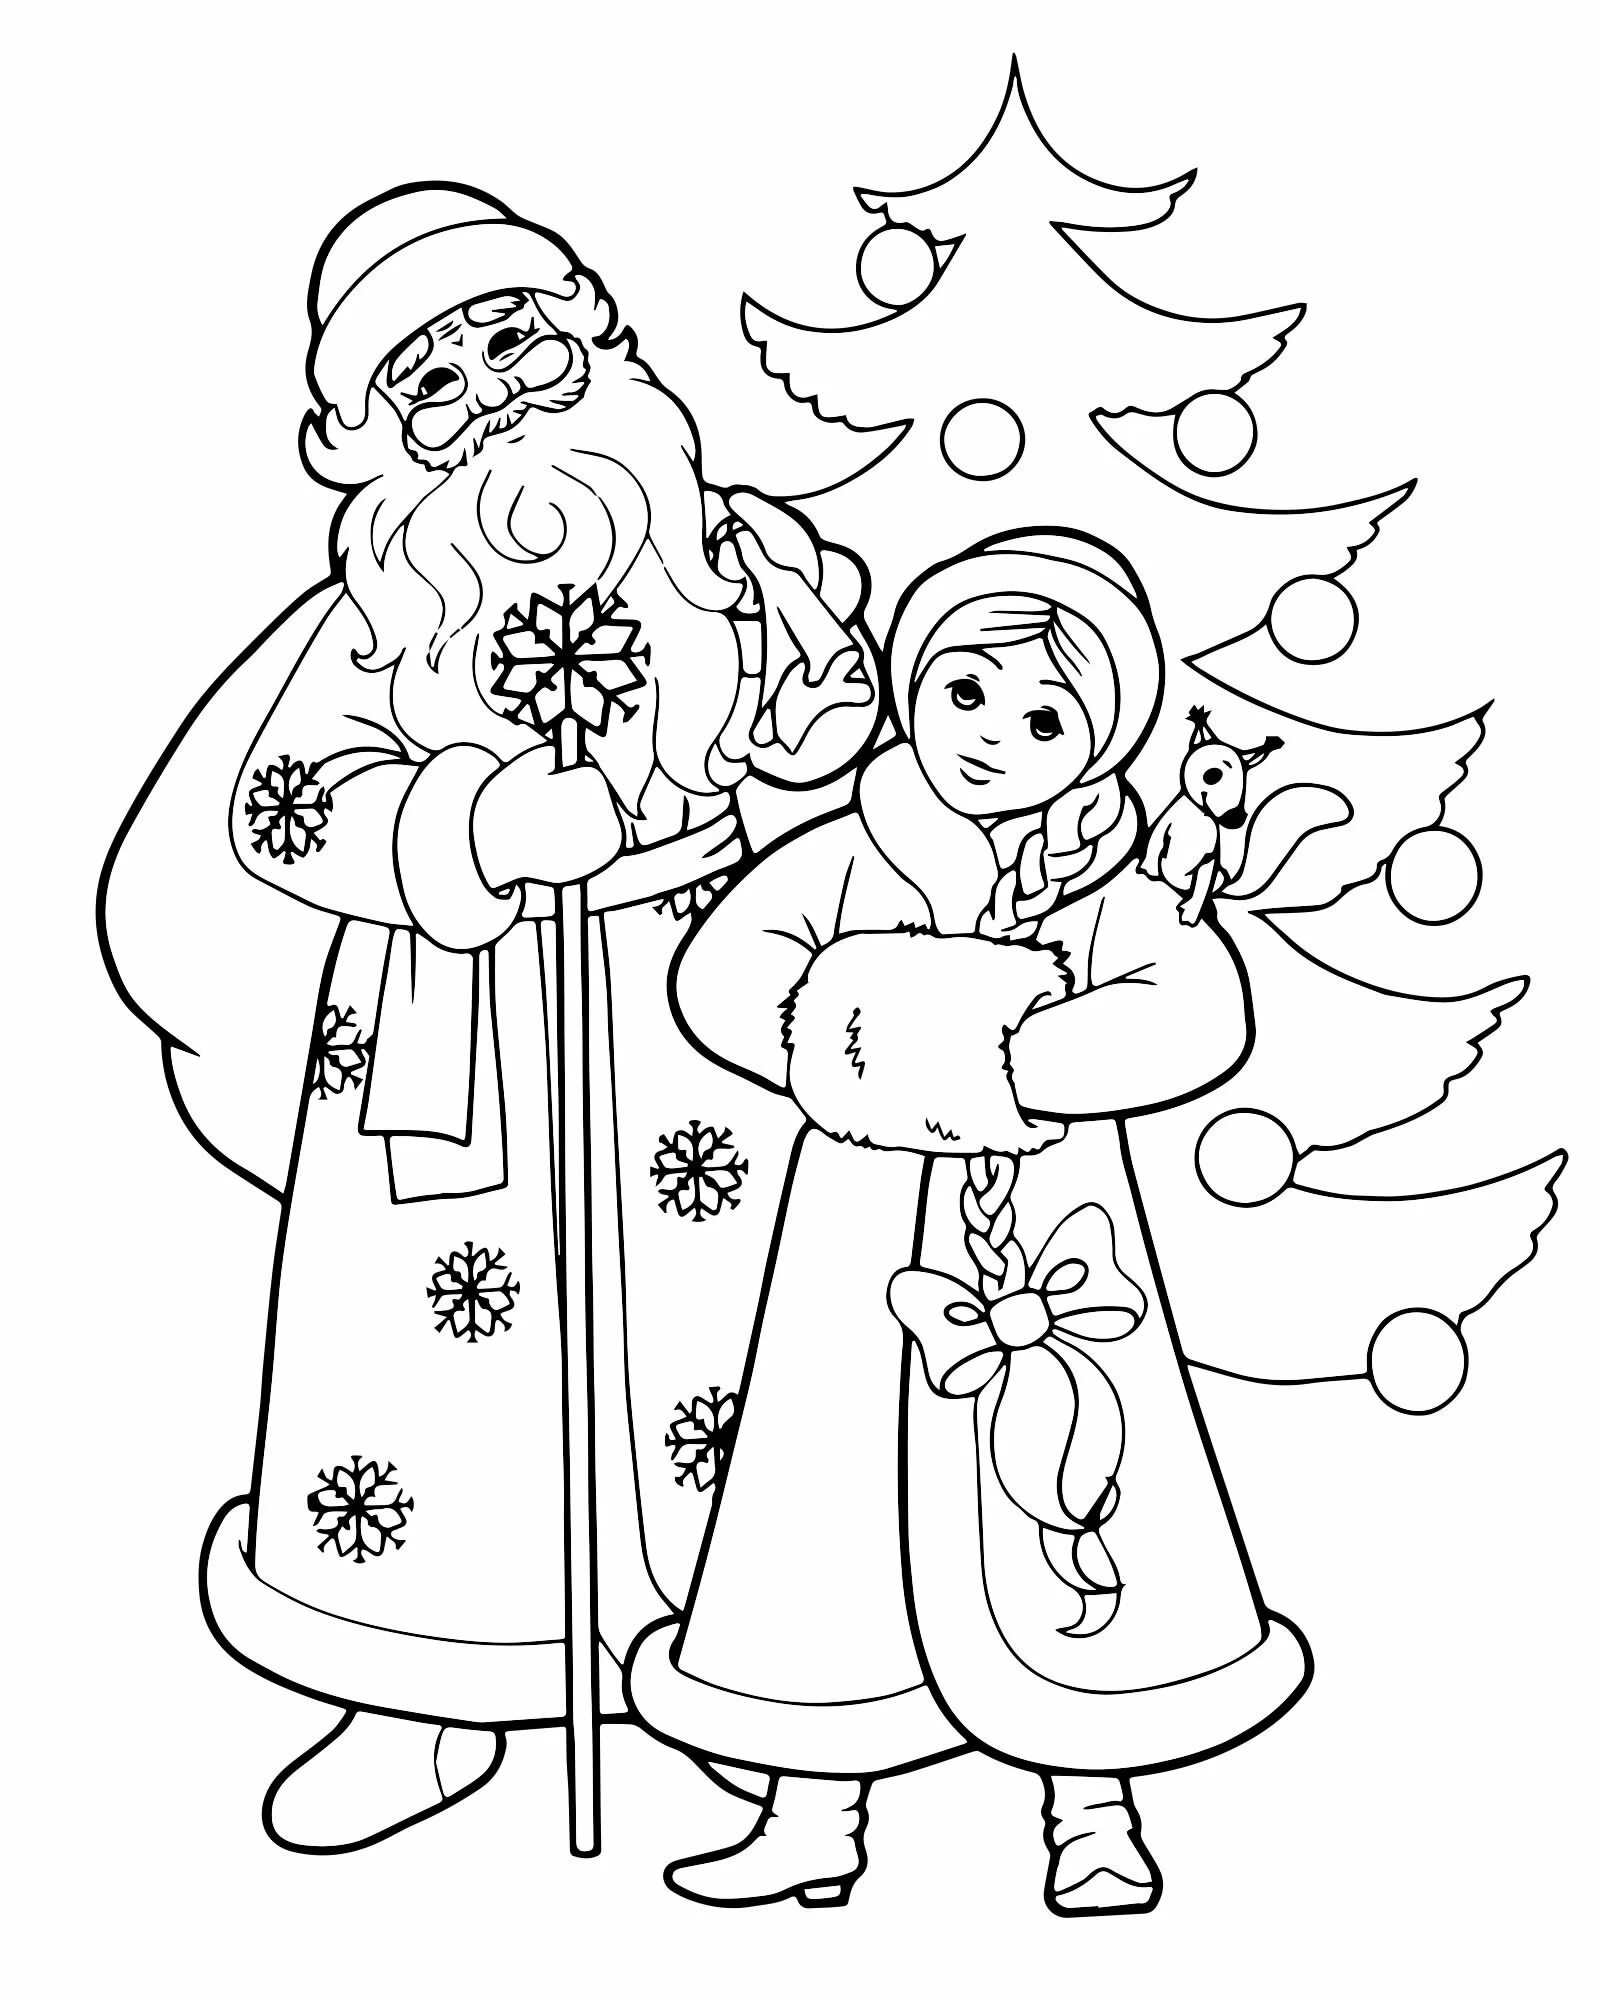 Santa Claus and Snow Maiden drawing #14